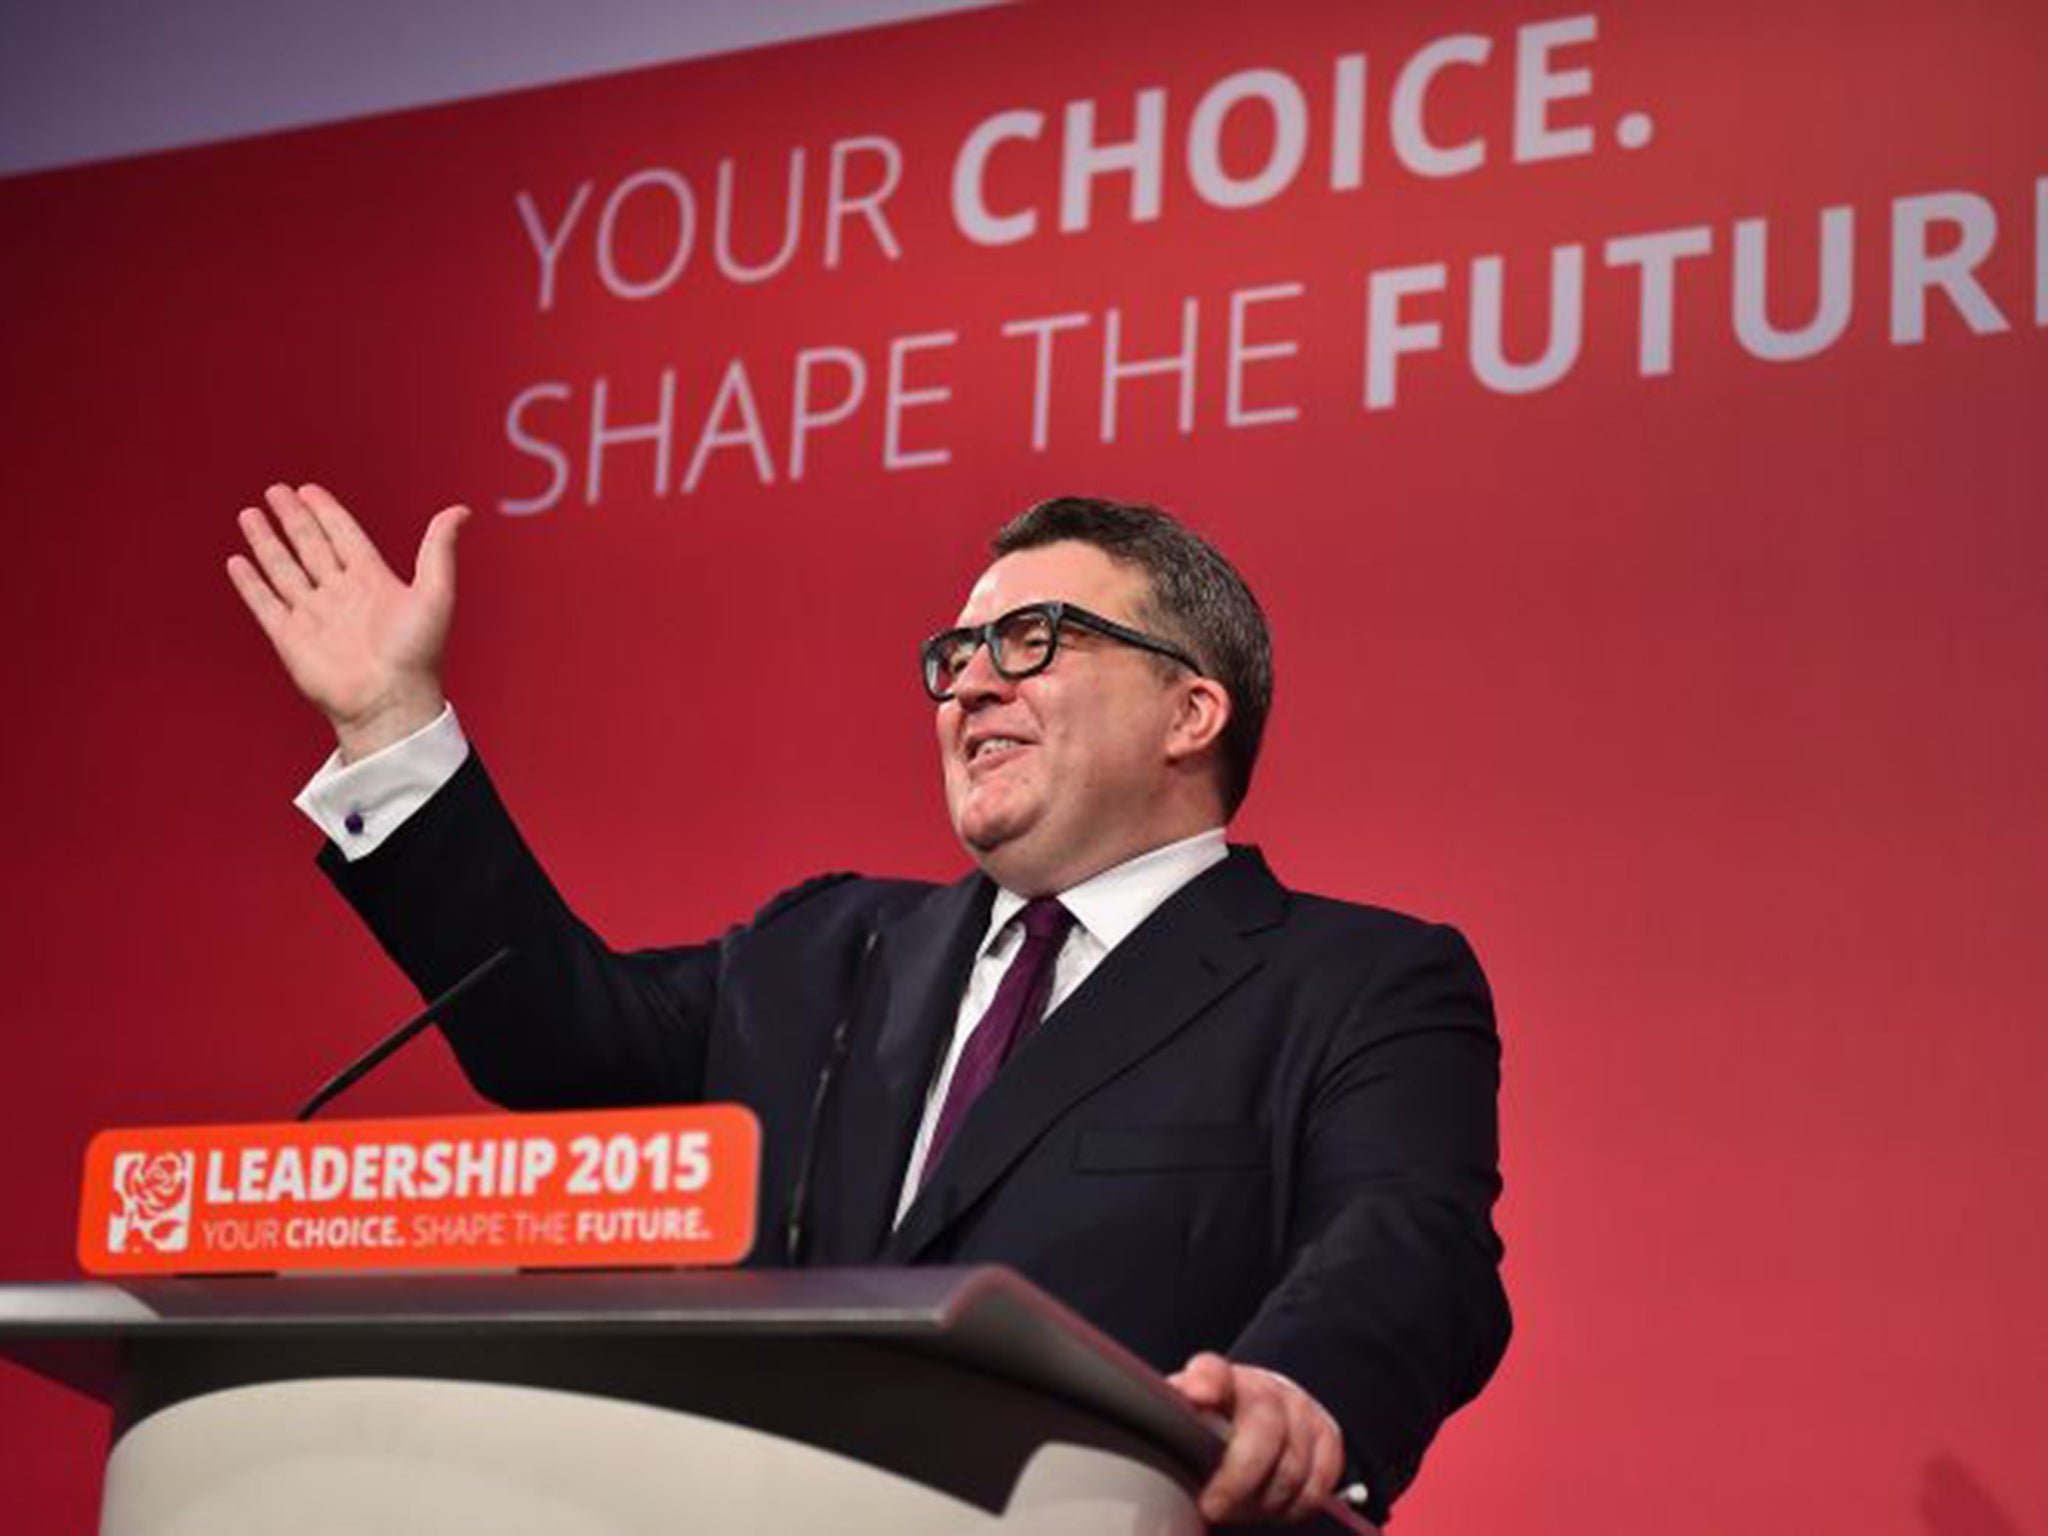 Tom Watson’s victory speech in the deputy leader contest acknowledged his new role as in-house moderator